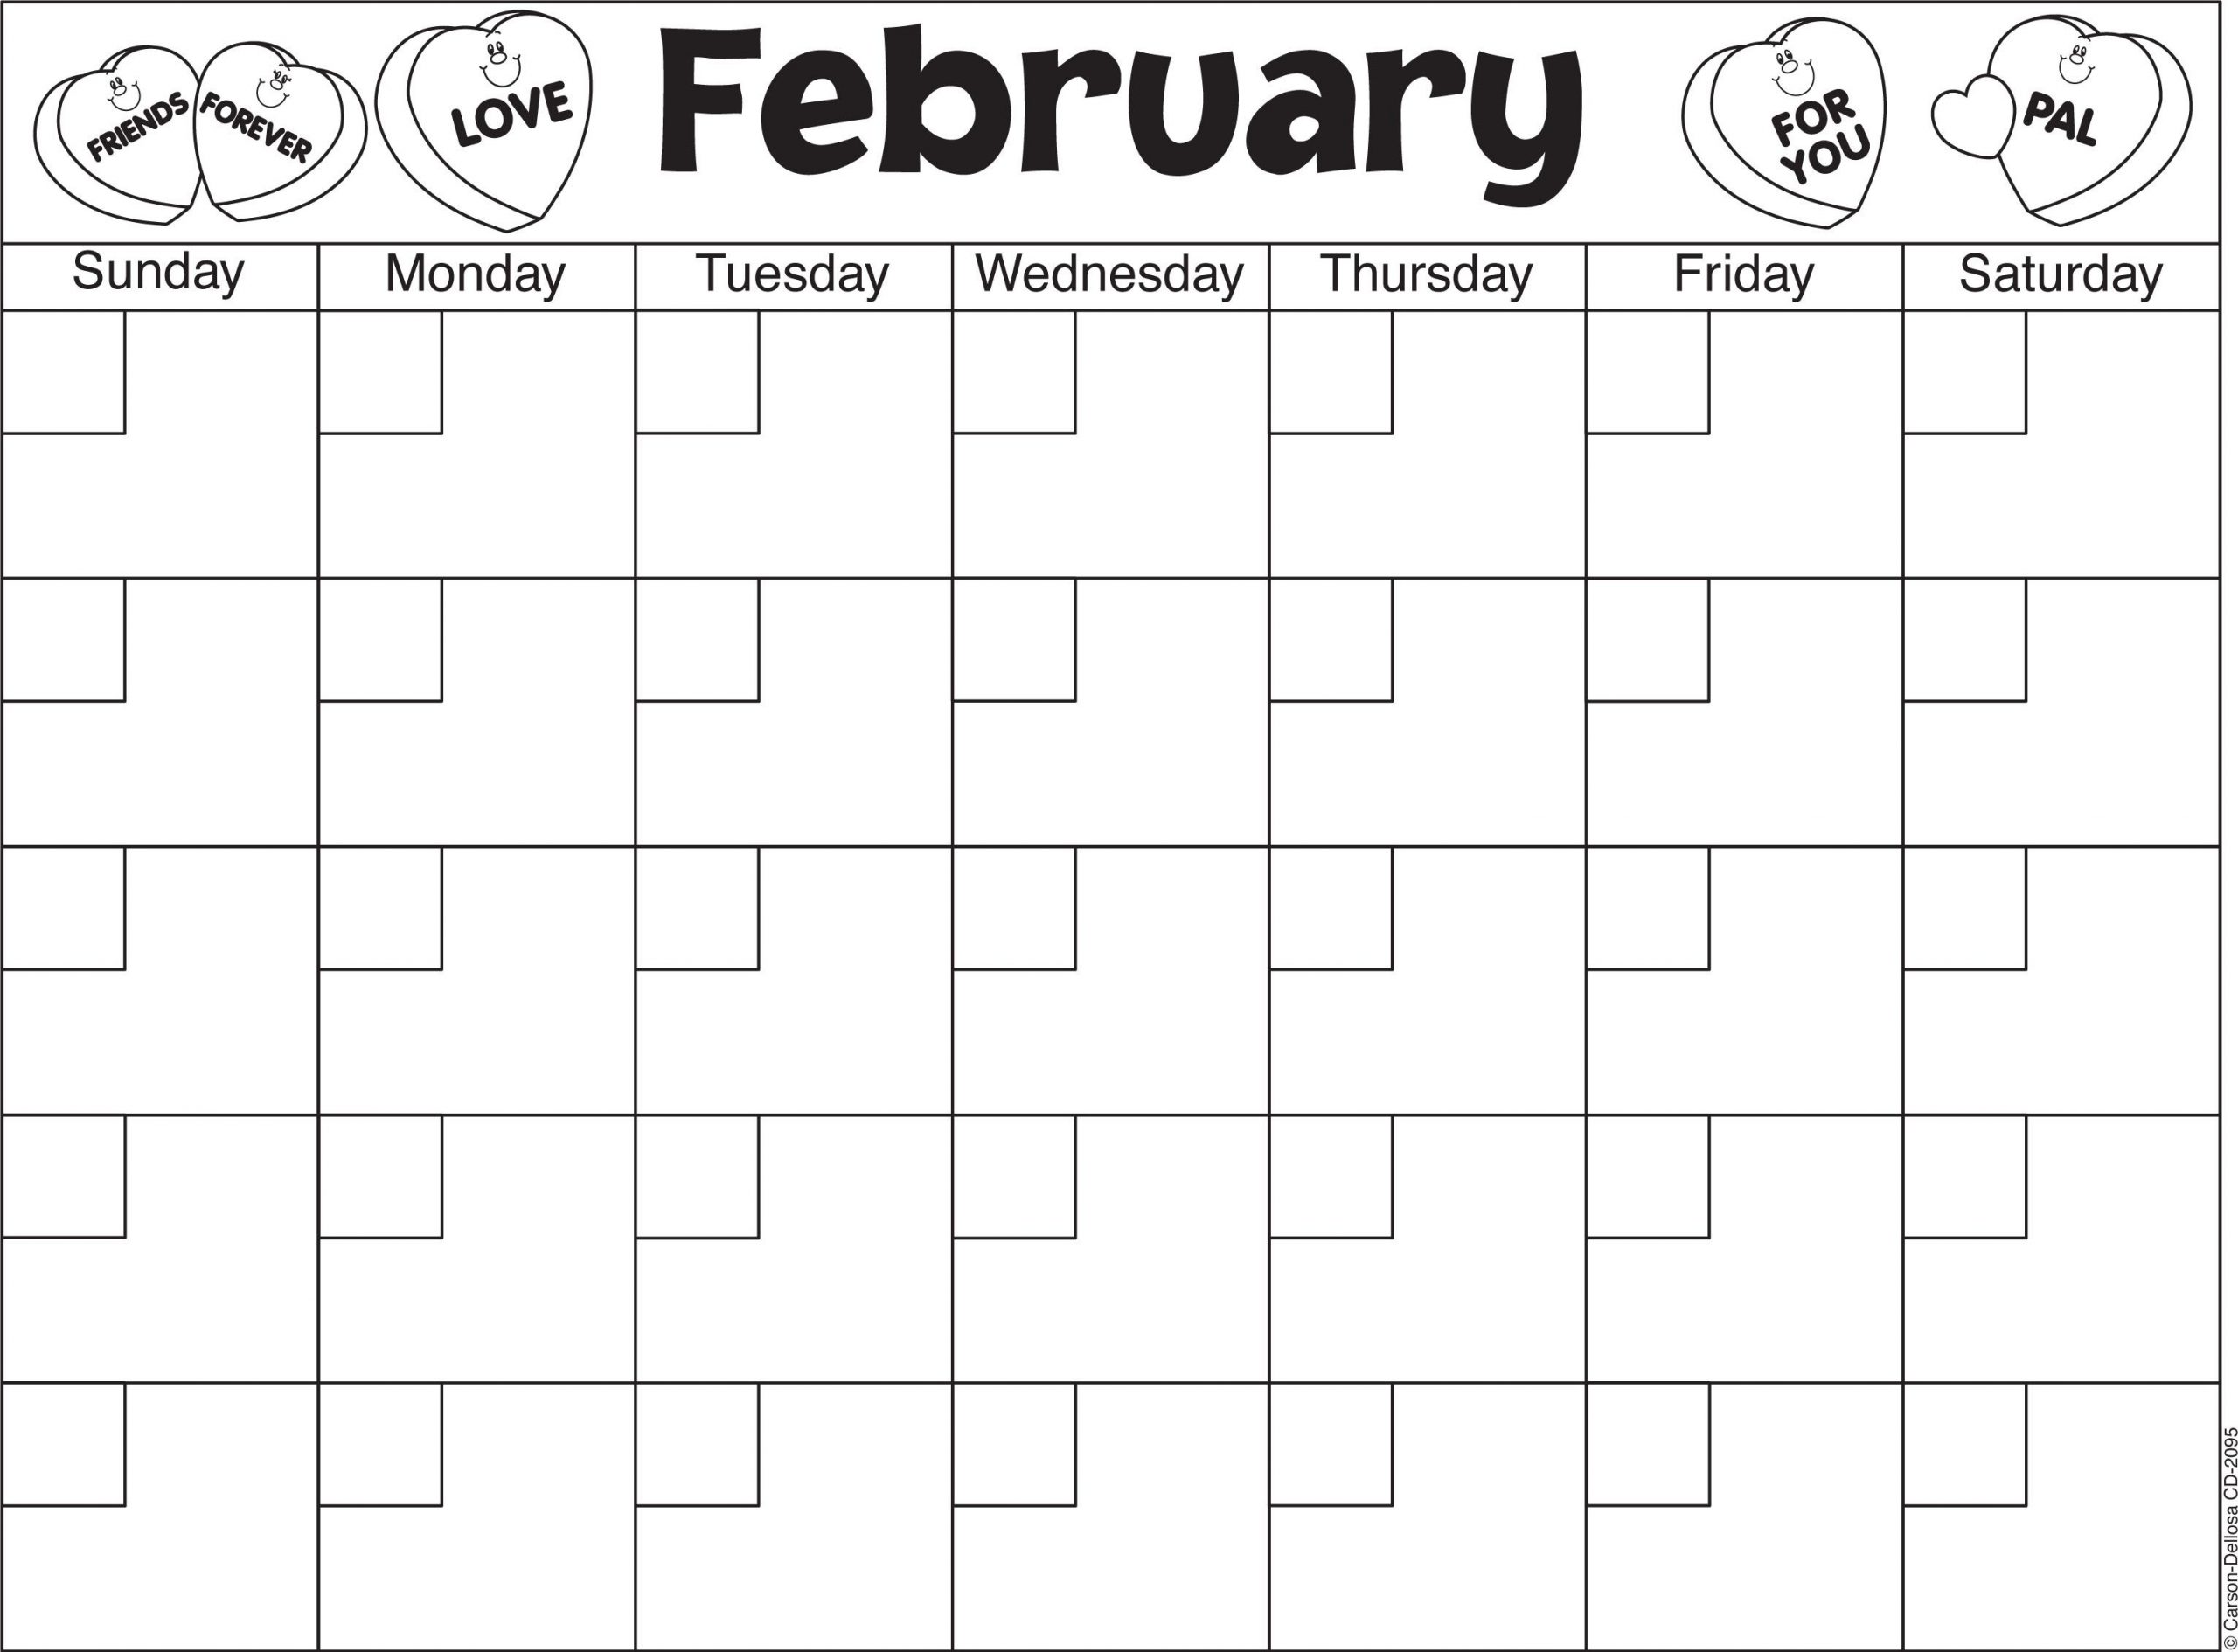 February Calendar Template--Great Way To Practice Counting